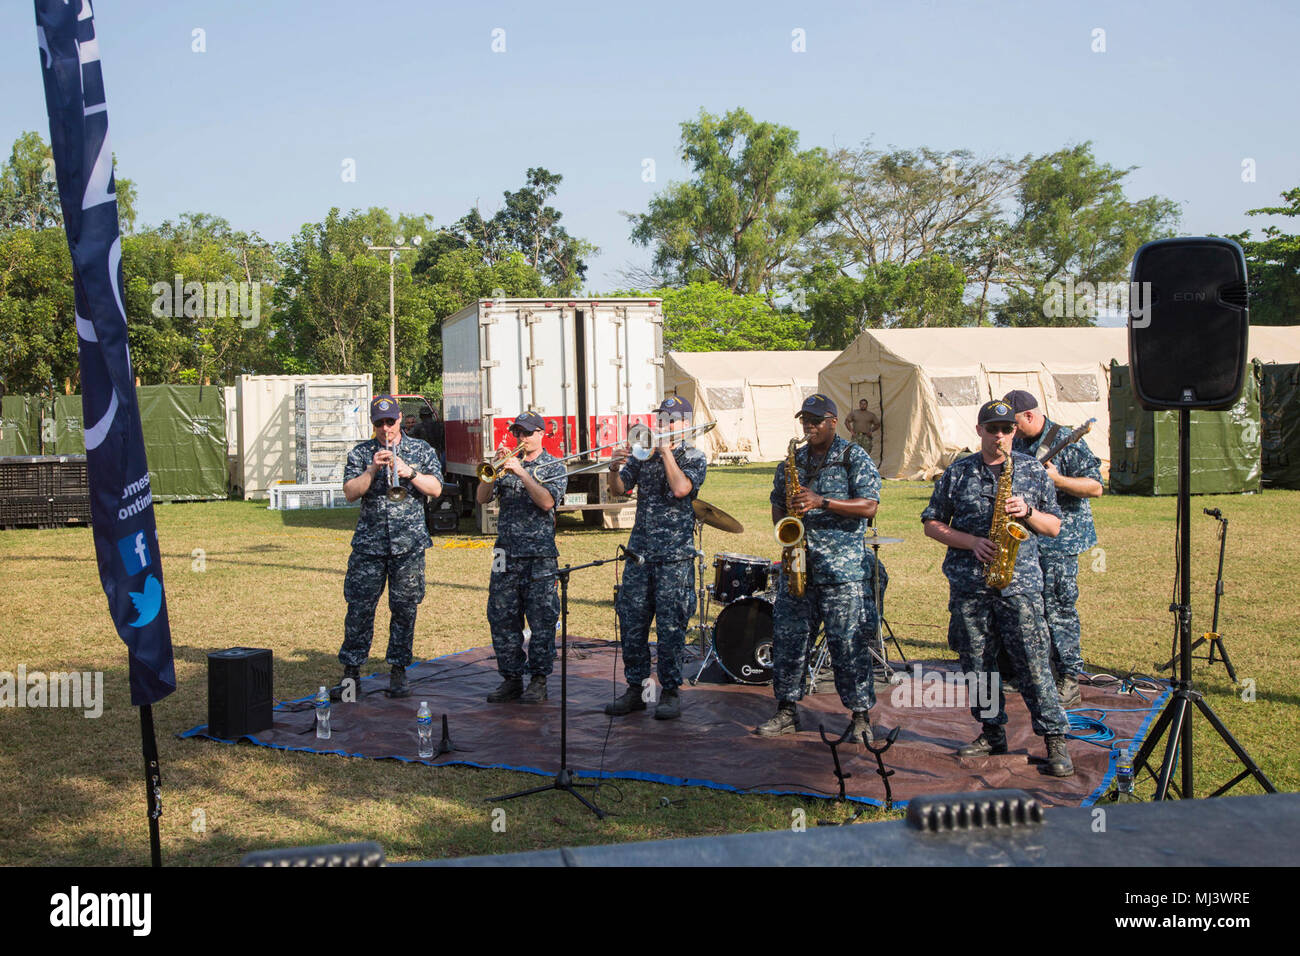 PUERTO CORTES, Honduras (March 20, 2018) The U.S. Fleet Forces Band performs at the Franklin D. Roosevelt School medical site in Puerto Cortes, Honduras, during Continuing Promise 2018. U.S. Naval Forces Southern Command/U.S. 4th Fleet has deployed a force to execute Continuing Promise to conduct civil-military operations including humanitarian assistance, training engagements, and medical, dental, and veterinary support in an effort to show U.S. support and commitment to Central and South America. (U.S. Army Image collection celebrating the bravery dedication commitment and sacrifice of U.S.  Stock Photo